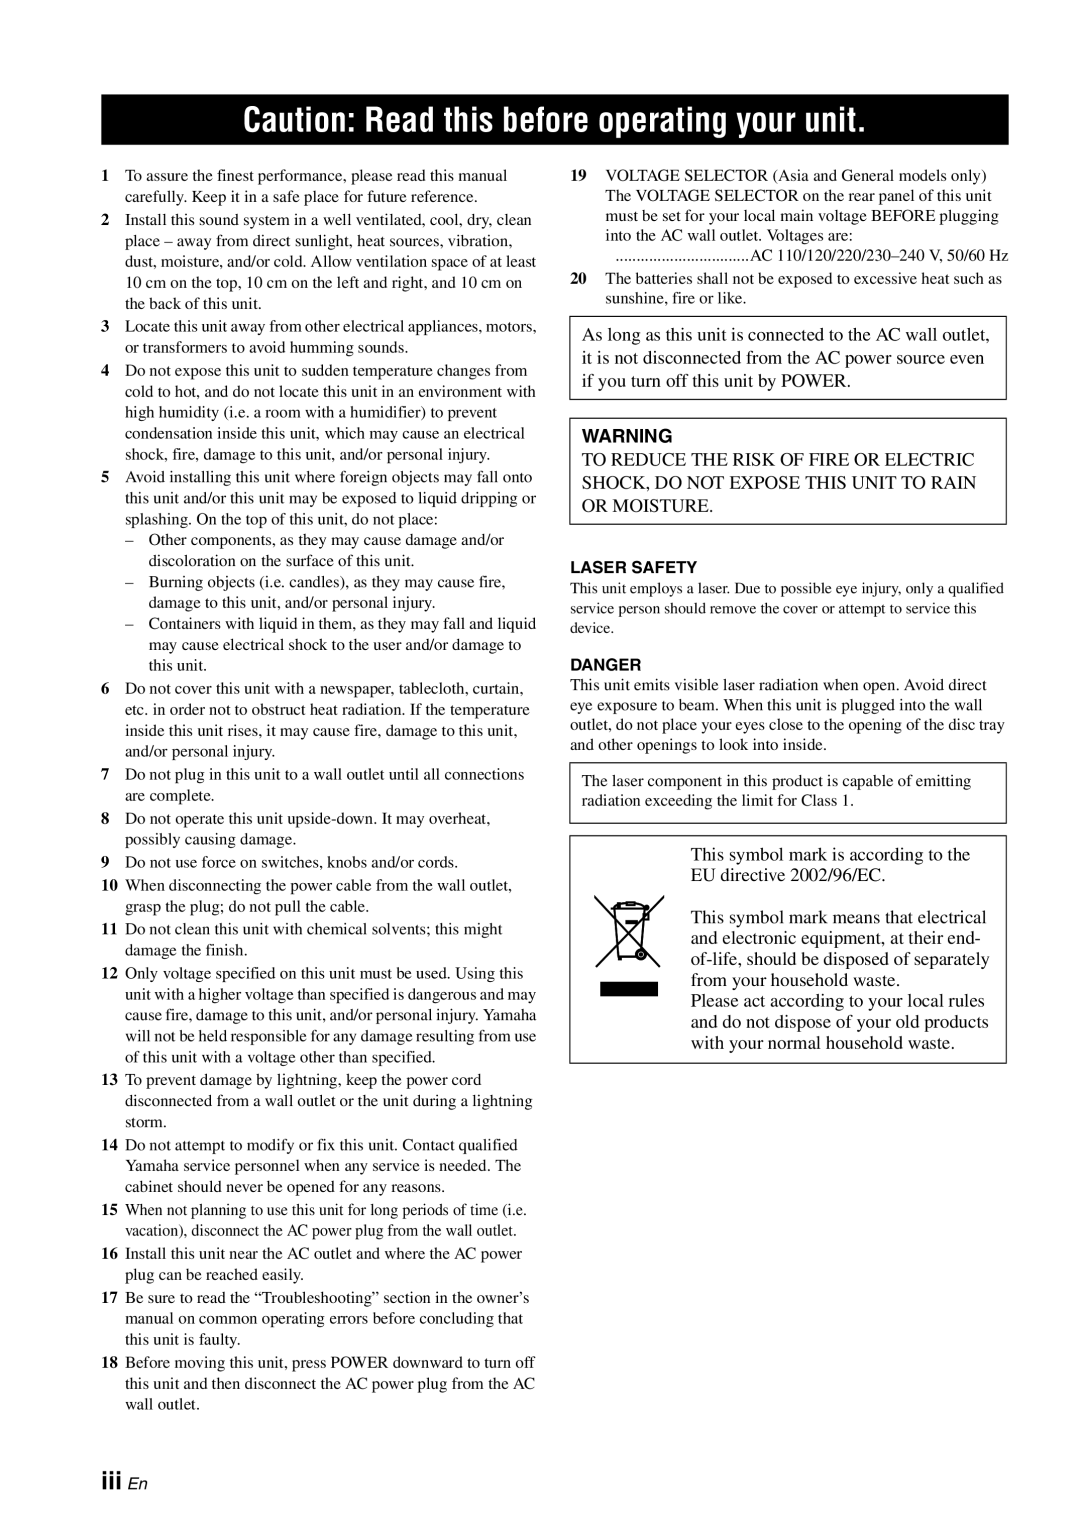 Yamaha CD-S1000 owner manual Caution Read this before operating your unit, iii En 